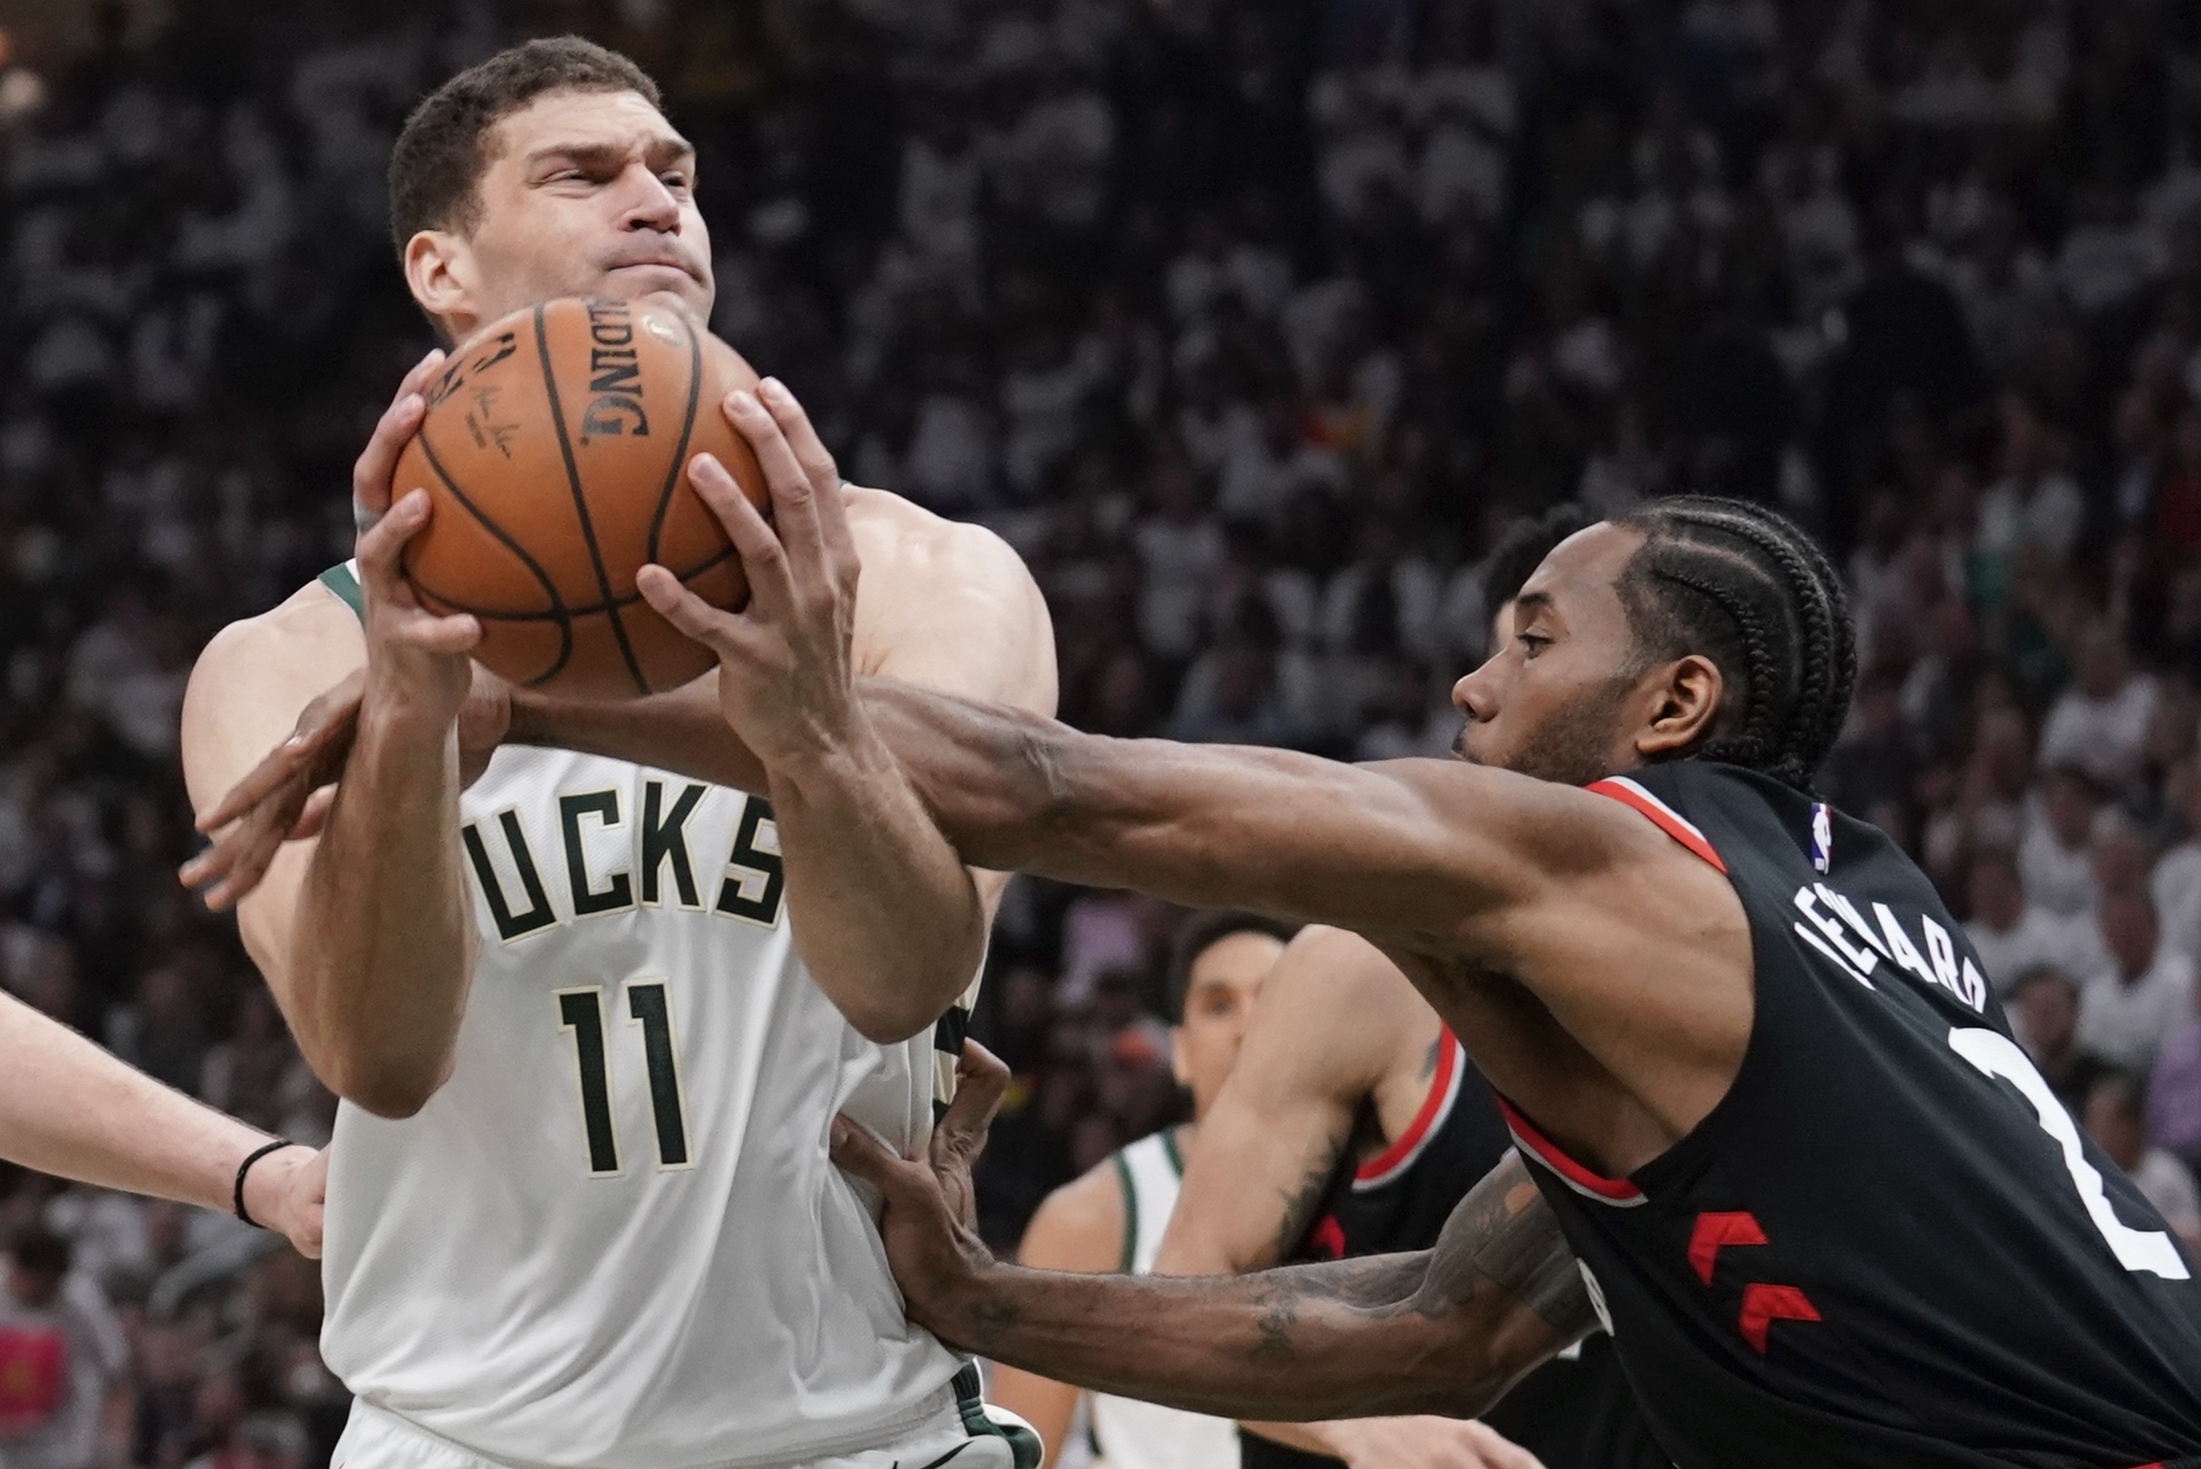 Nba Playoffs 2019 Updated Standings Conference Finals Schedule And More Bleacher Report Latest News Videos And Highlights